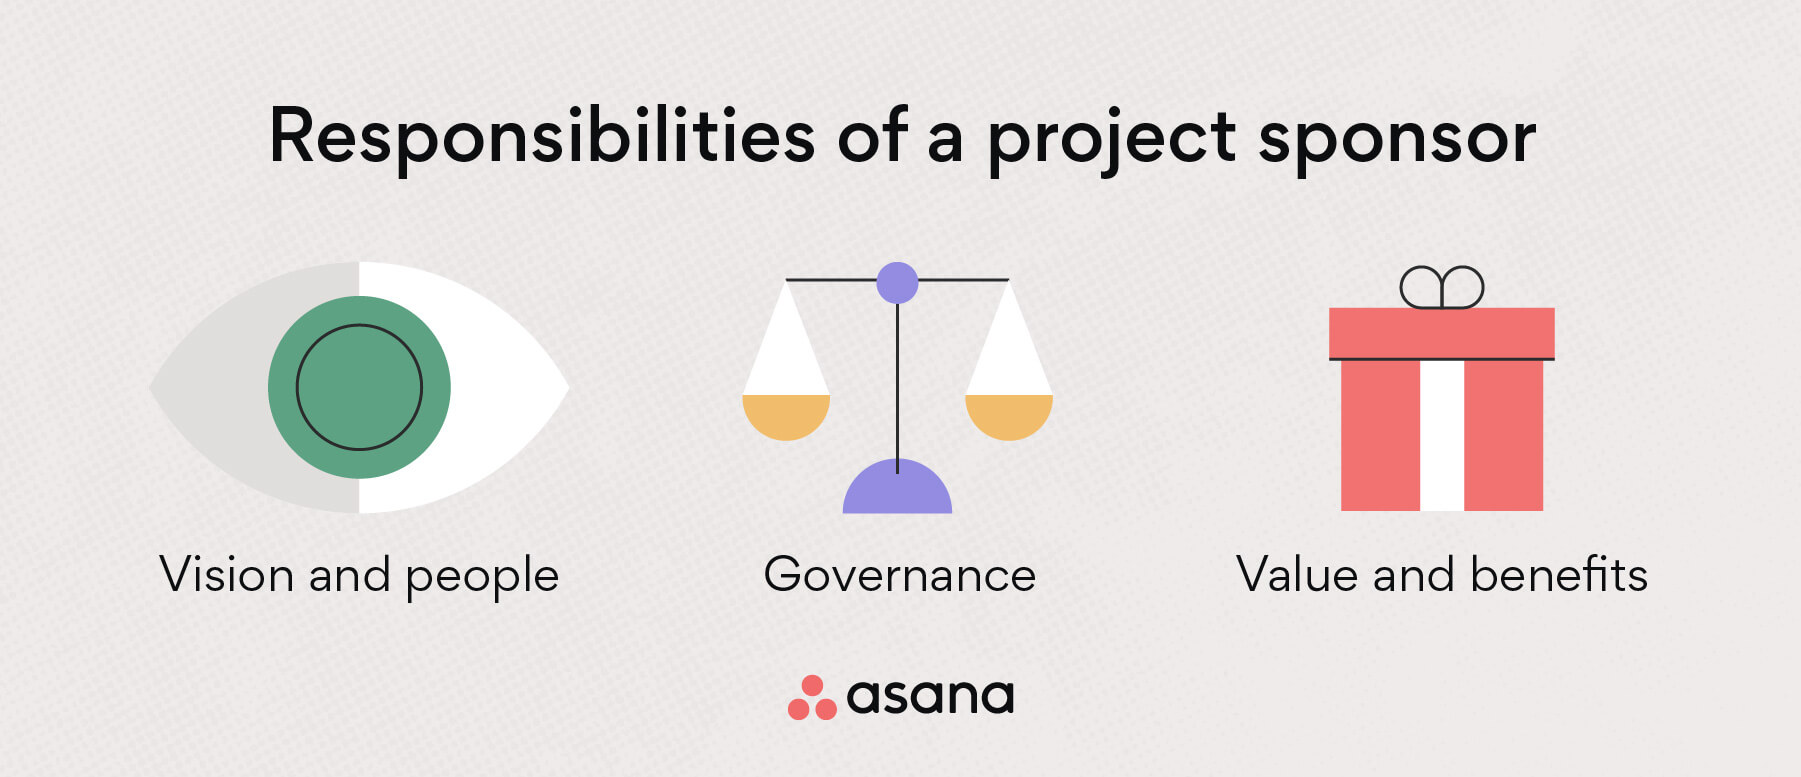 Responsibilities of a project sponsor